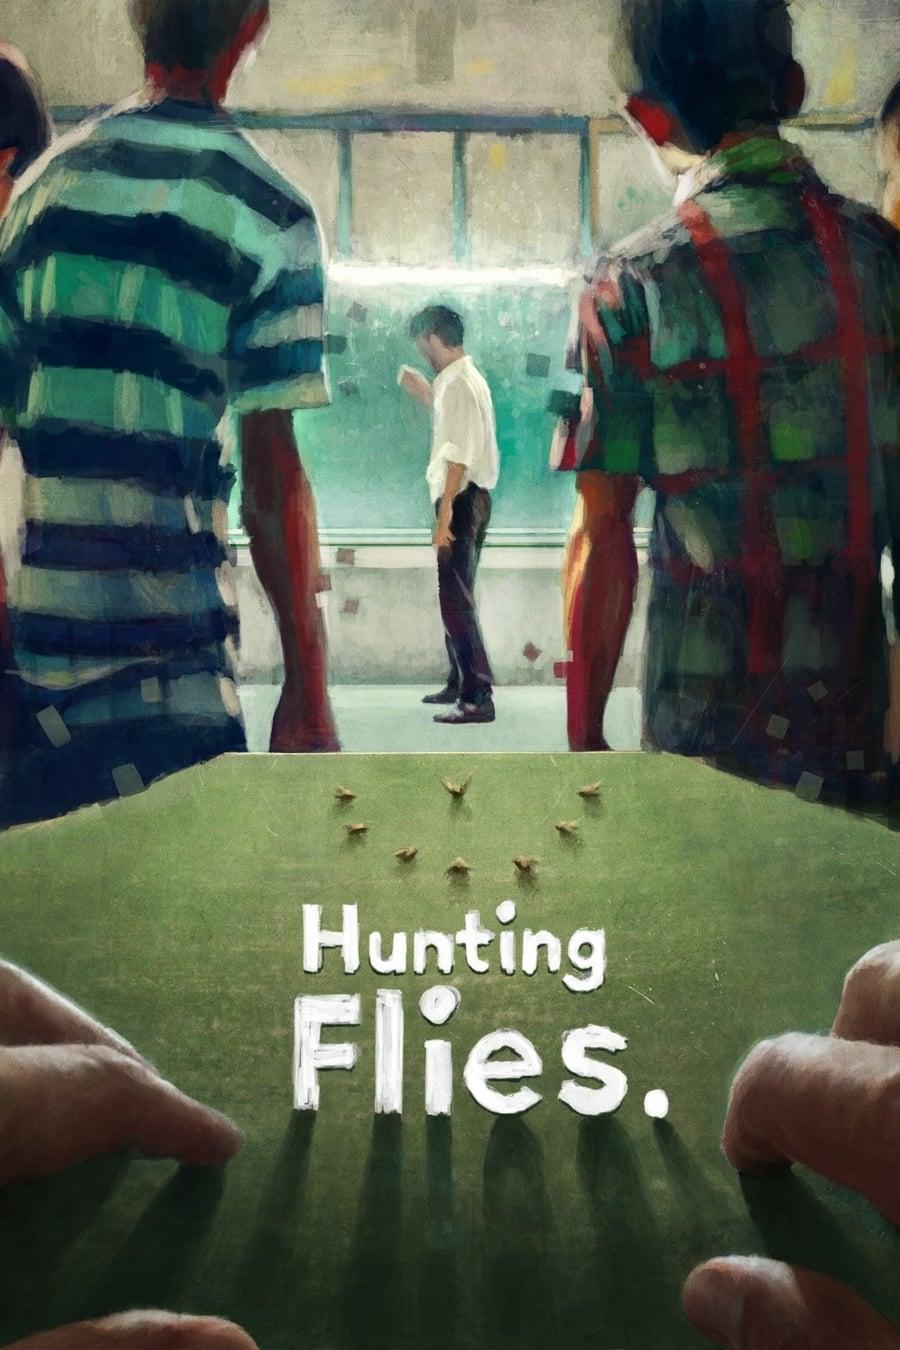 Hunting Flies poster